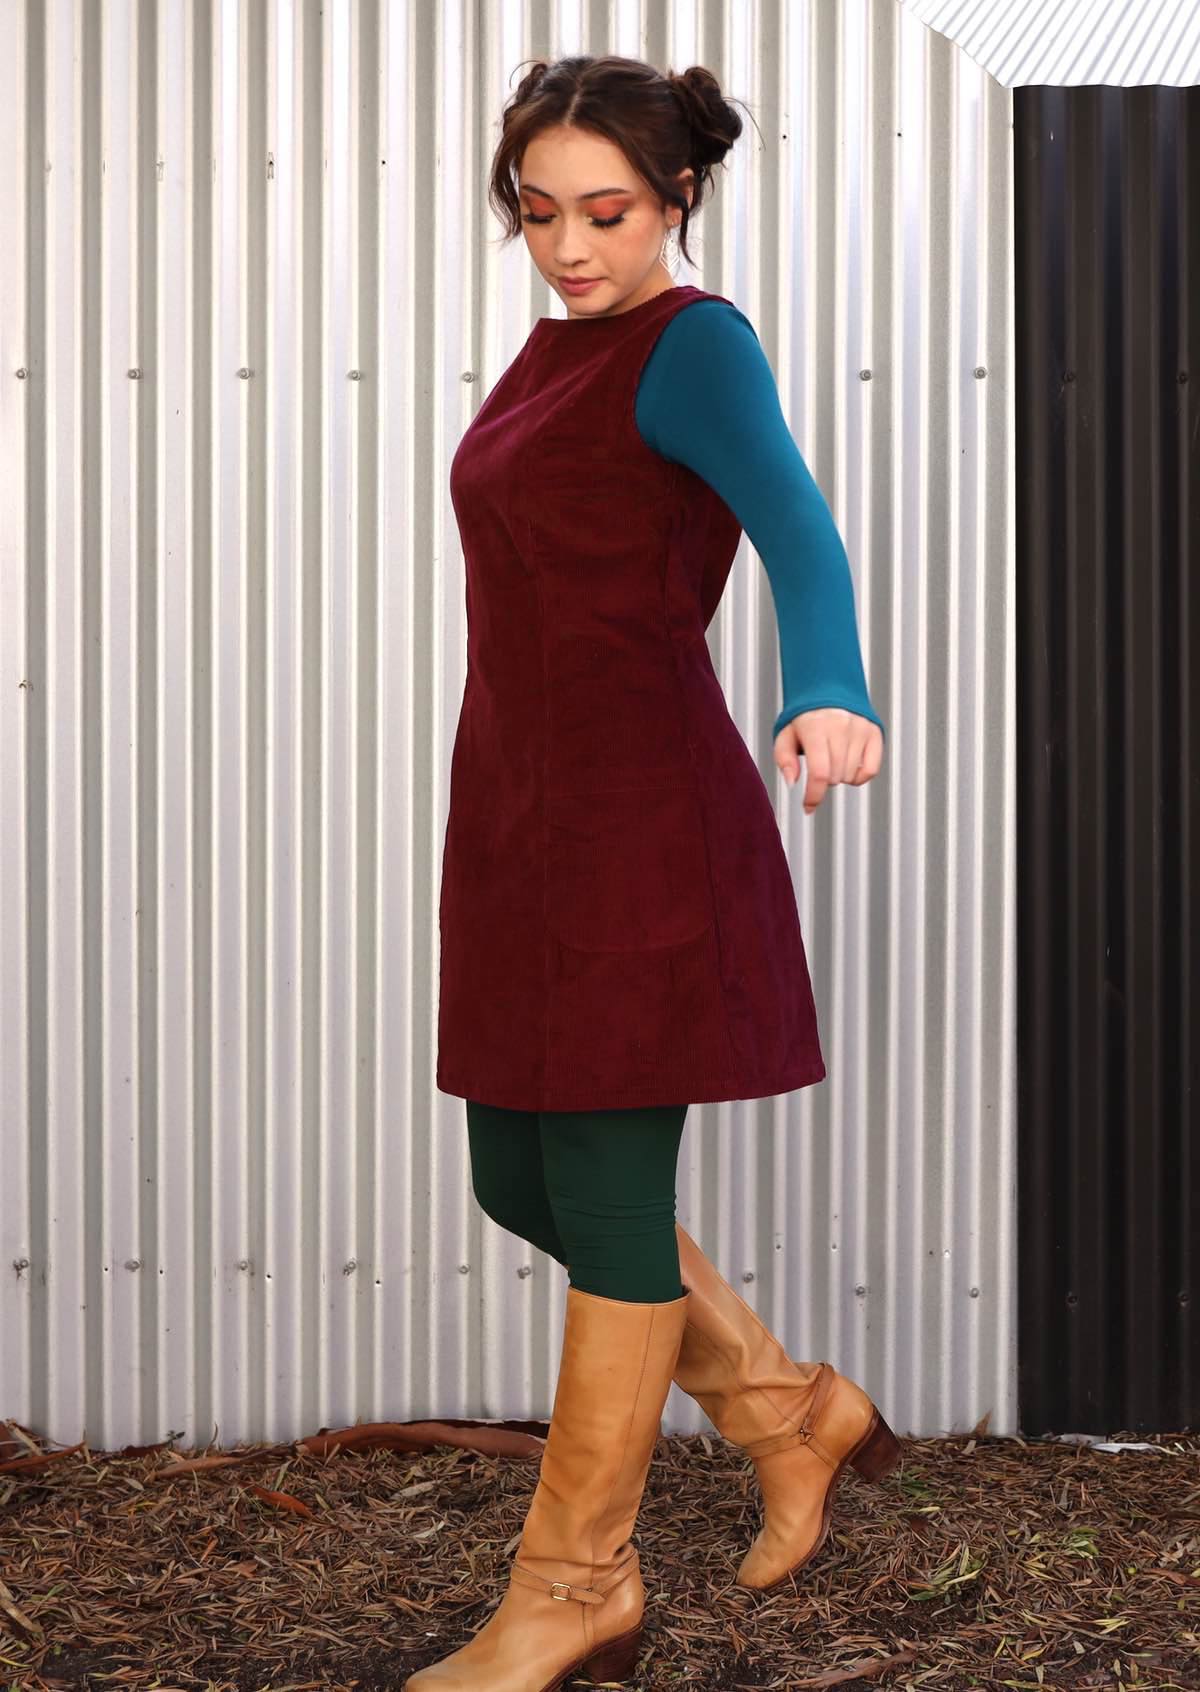 Shapely corduroy tunic with side zip and pockets